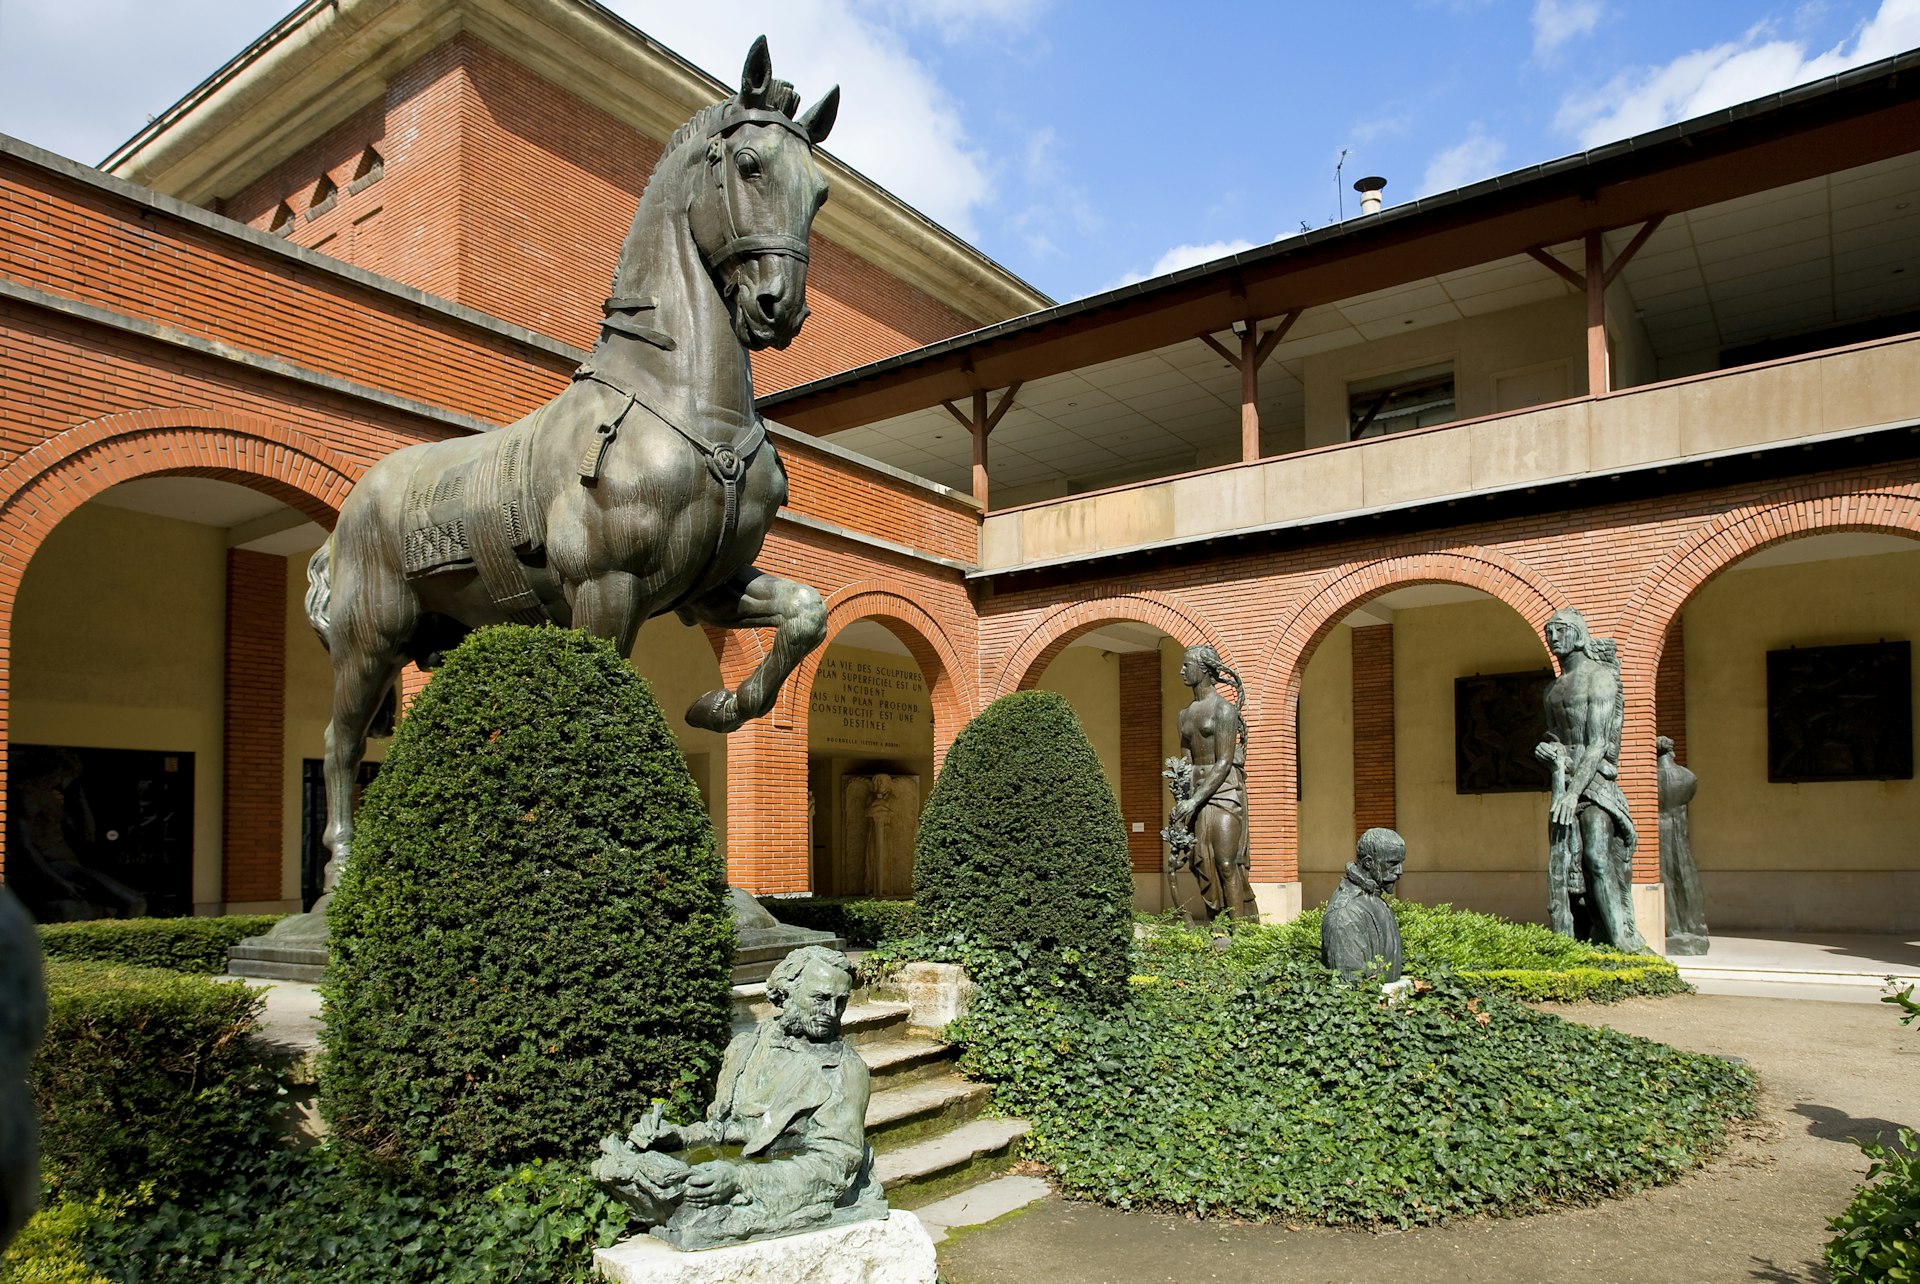 A large bronze scupture of a horse is displayed prominently in the garden of the Musée Bourdelle. Several other sculptures stand amid the topiary and manicured hedges.